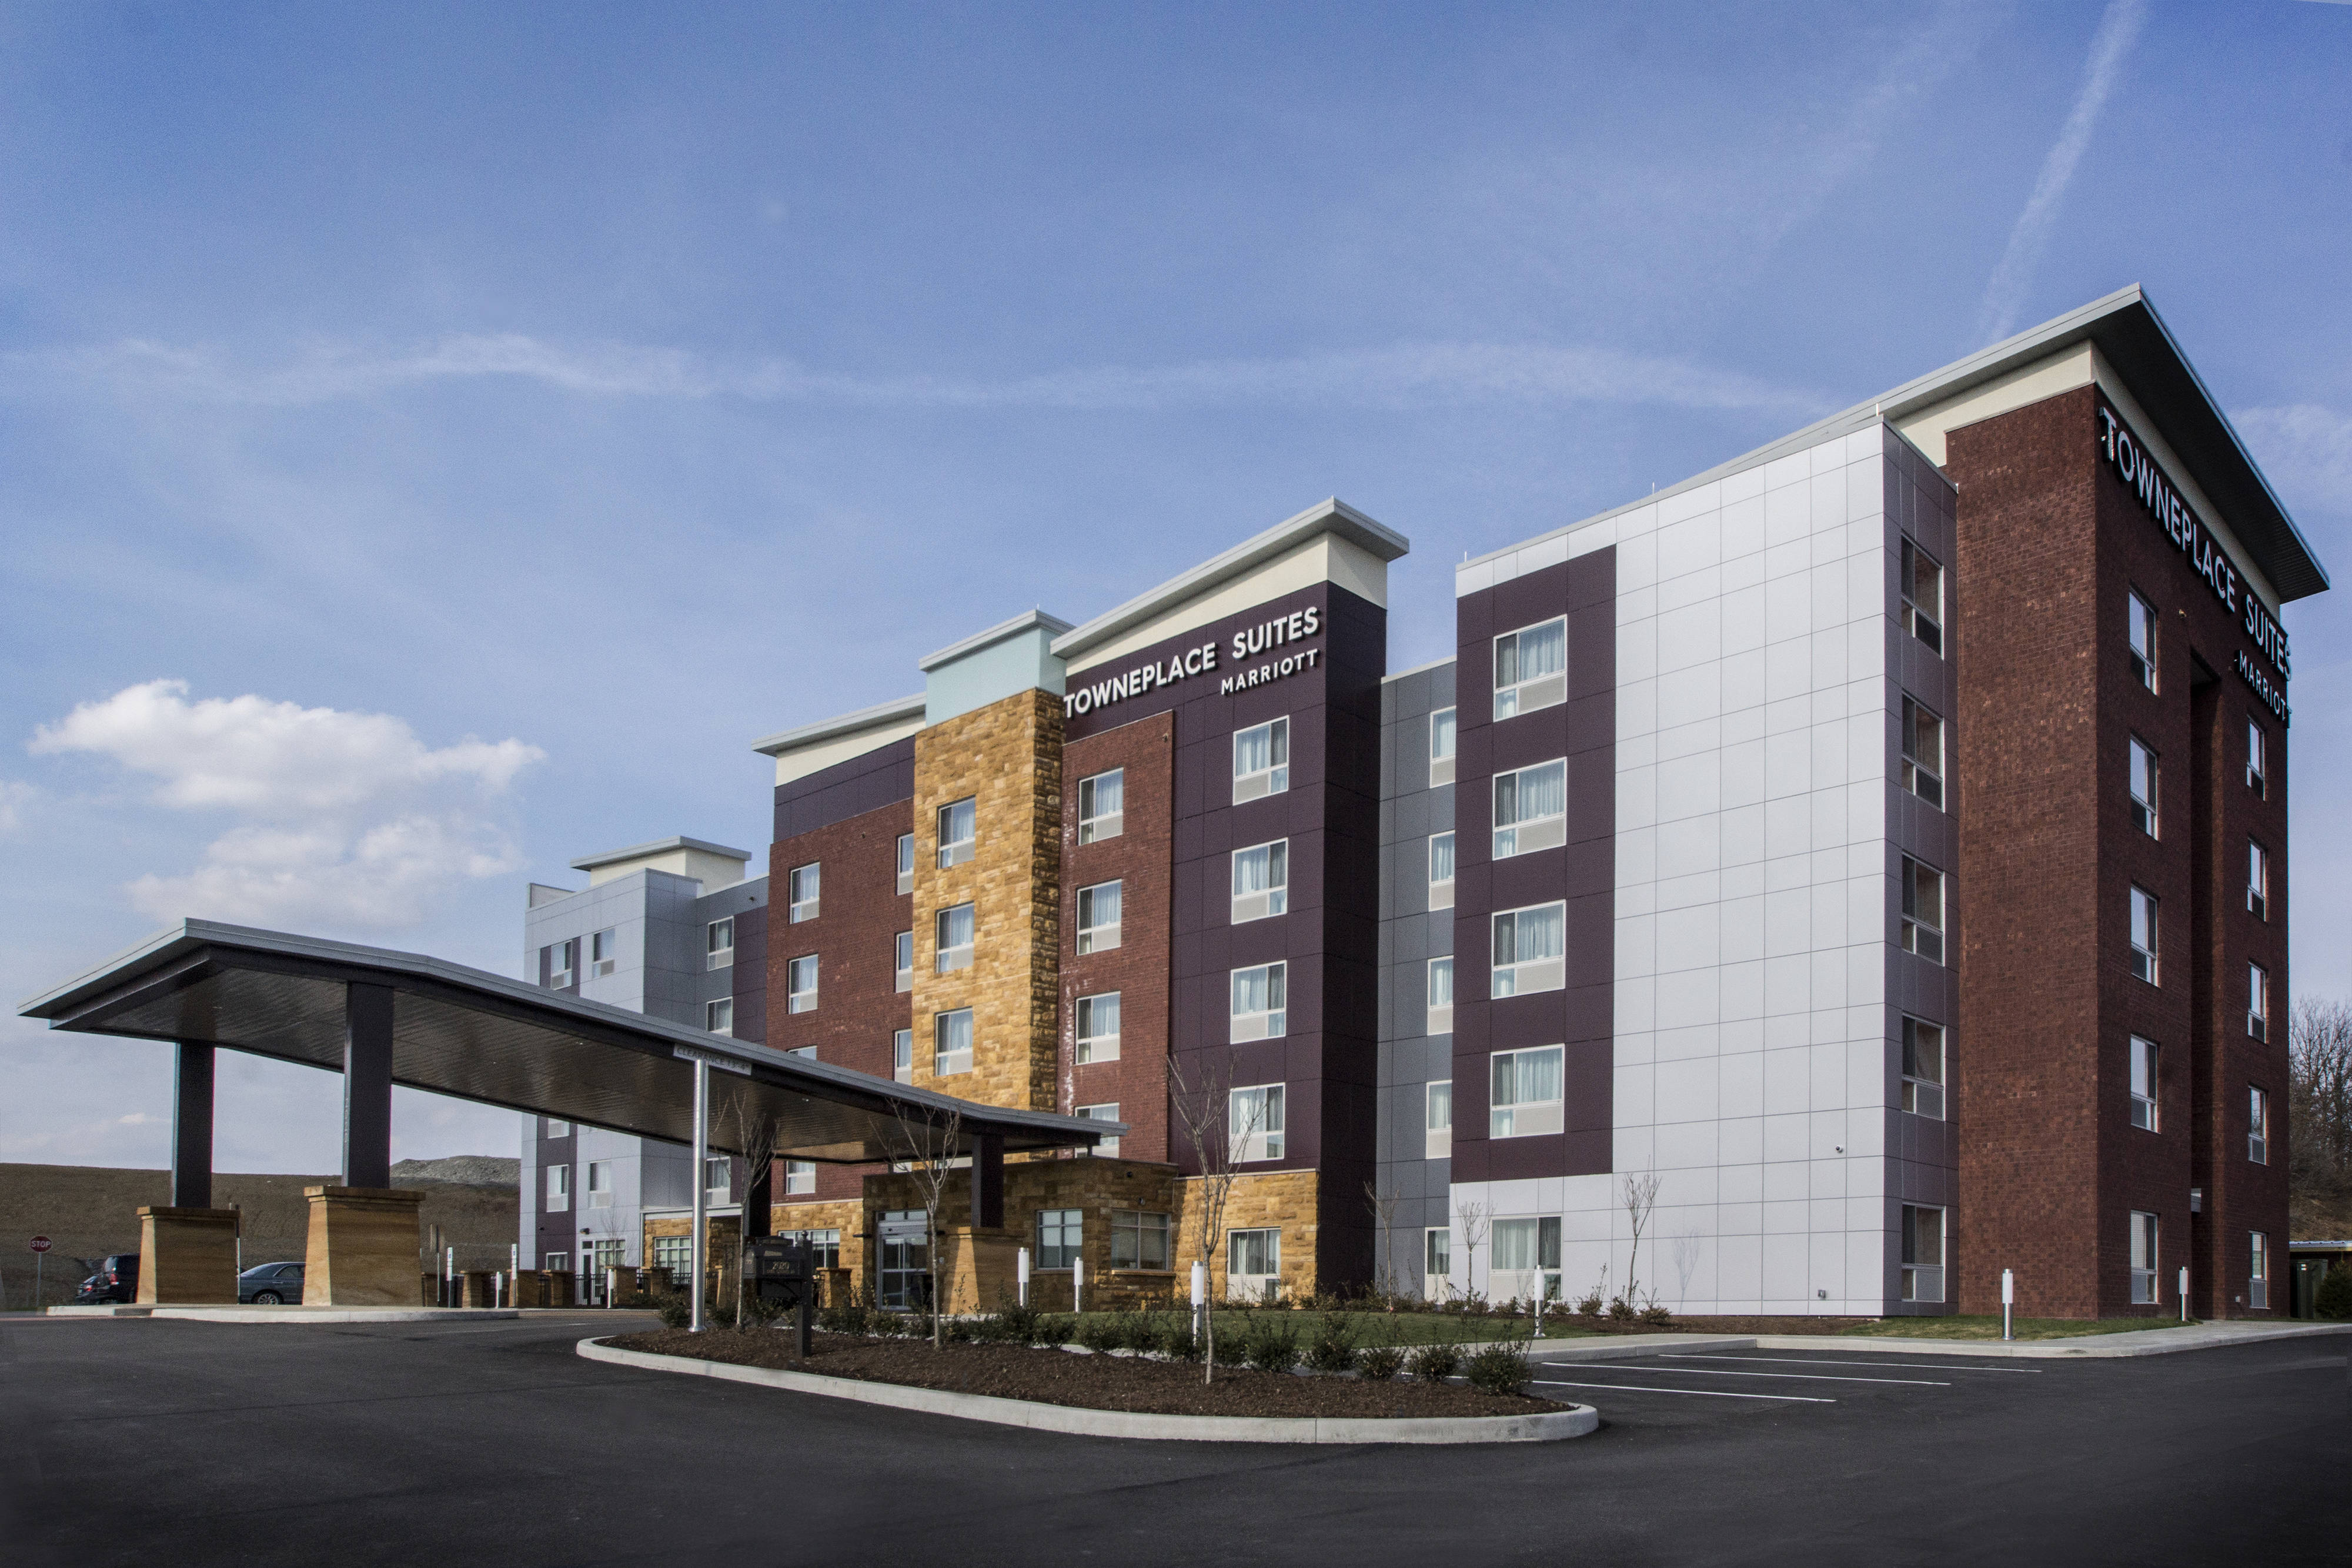 Photo of TownePlace Suites Pittsburgh Cranberry Township, Cranberry Township, PA